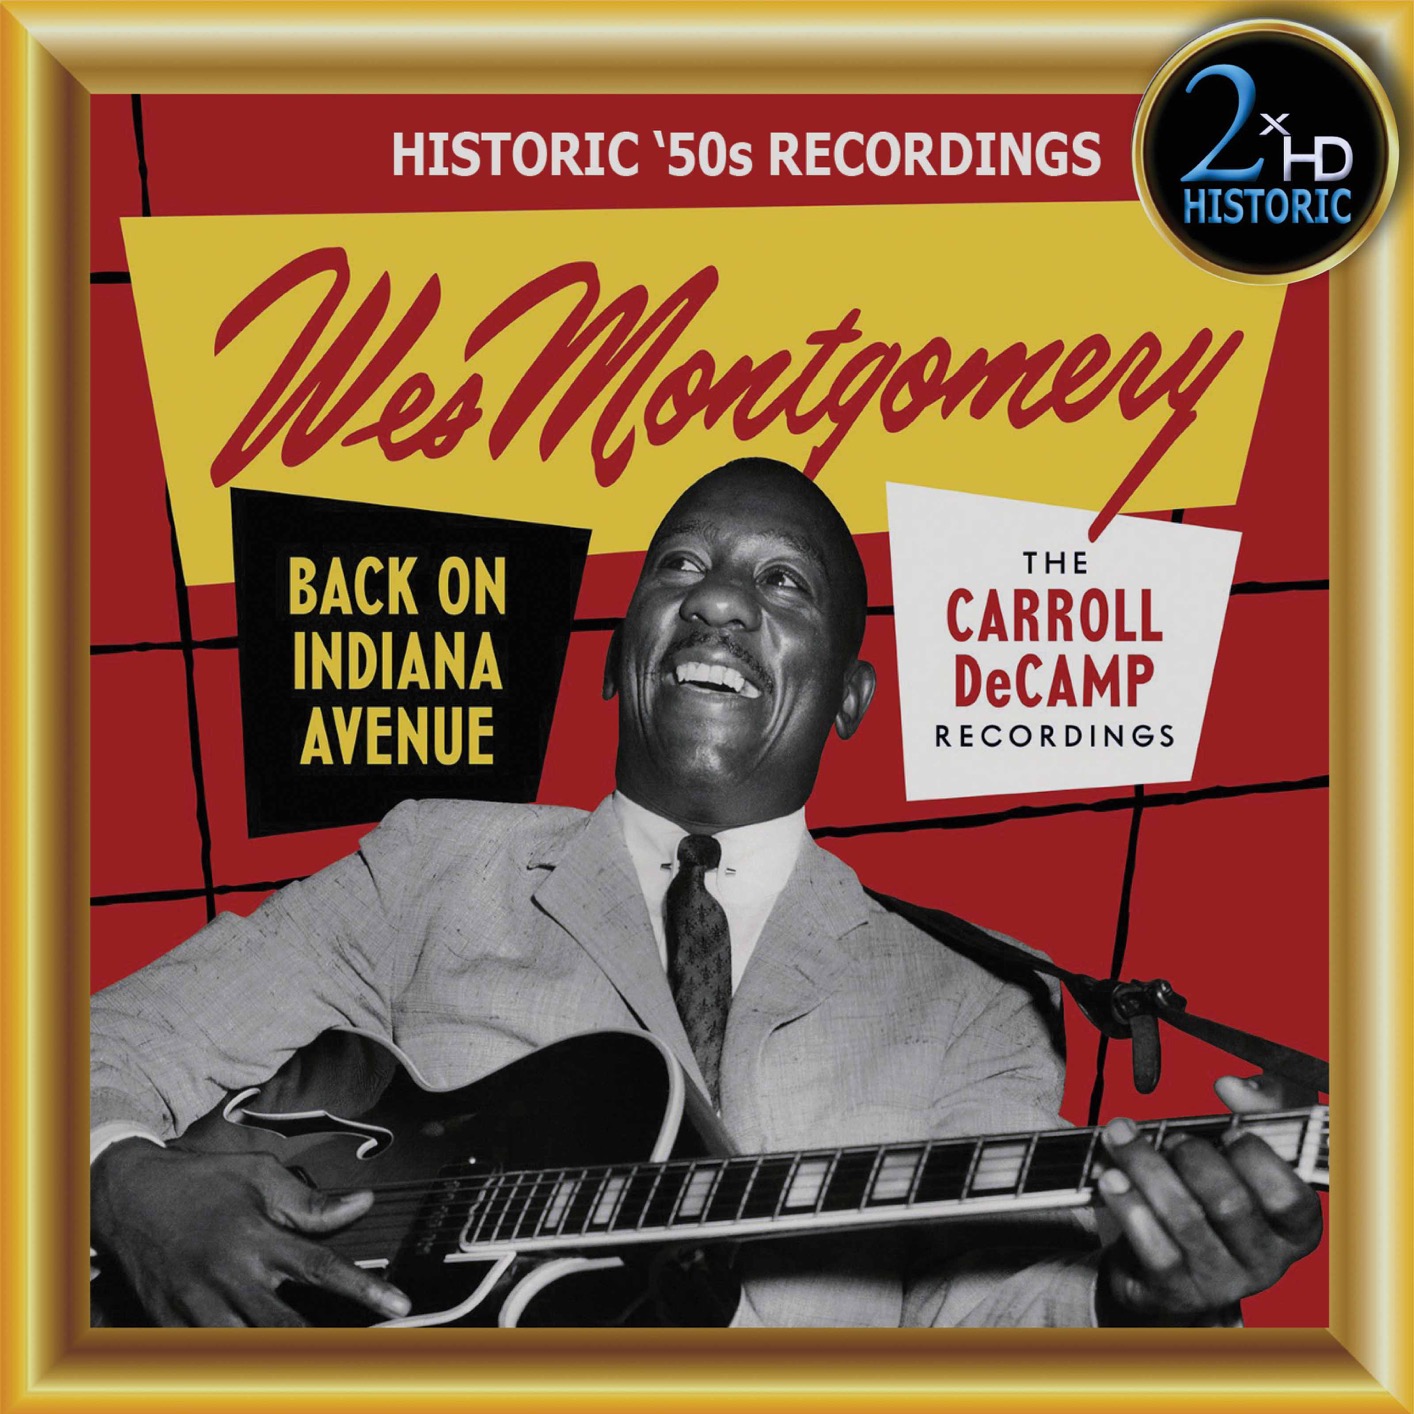 Wes Montgomery - Wes Montgomery, Back on Indiana Avenue: The Carroll DeCamp Recordings (Remastered) (2019) [FLAC 24bit/48kHz]